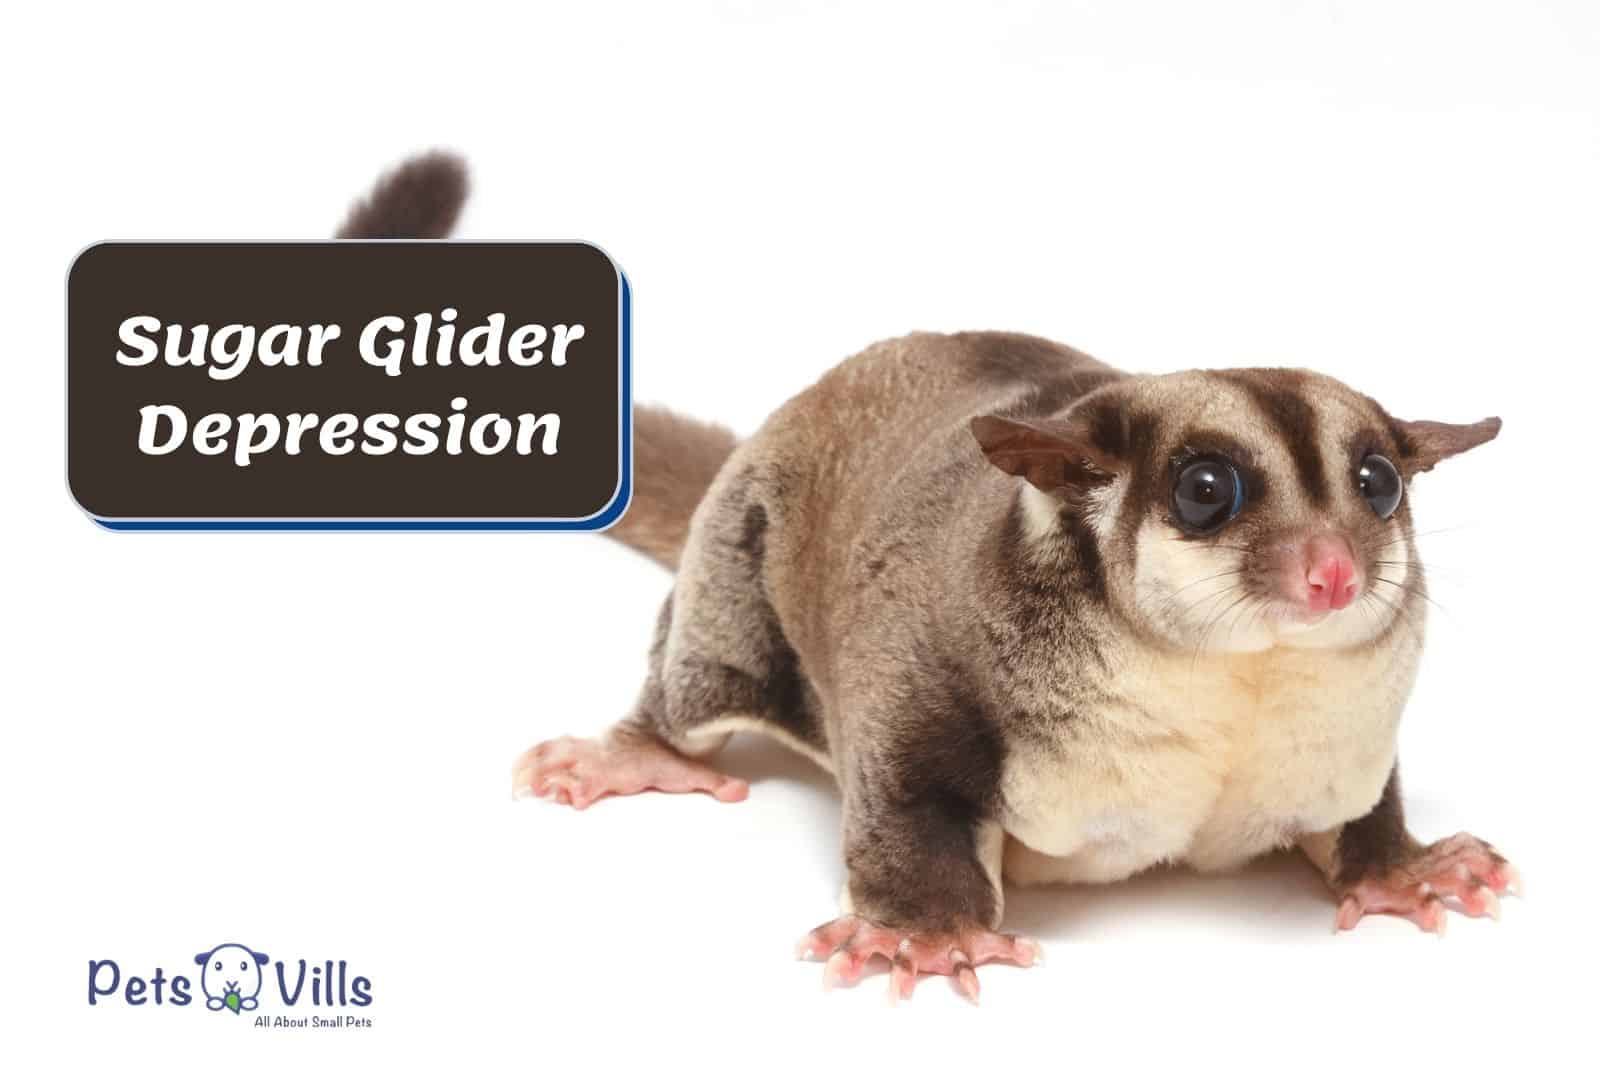 Sugar Glider Depression: 8 Important Warning Signs to Know